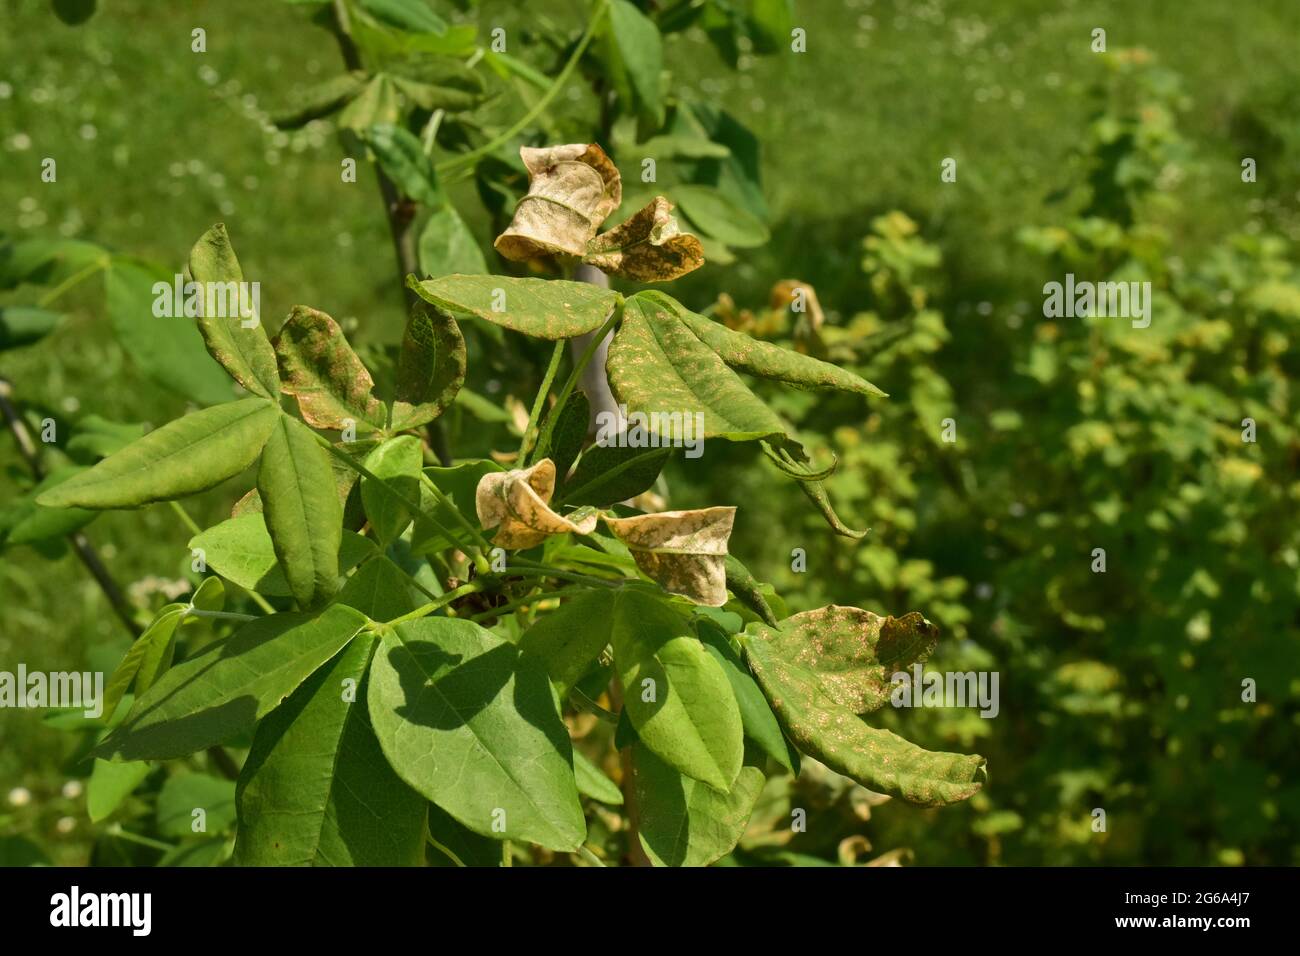 gold tree with a disease on the leaves Stock Photo